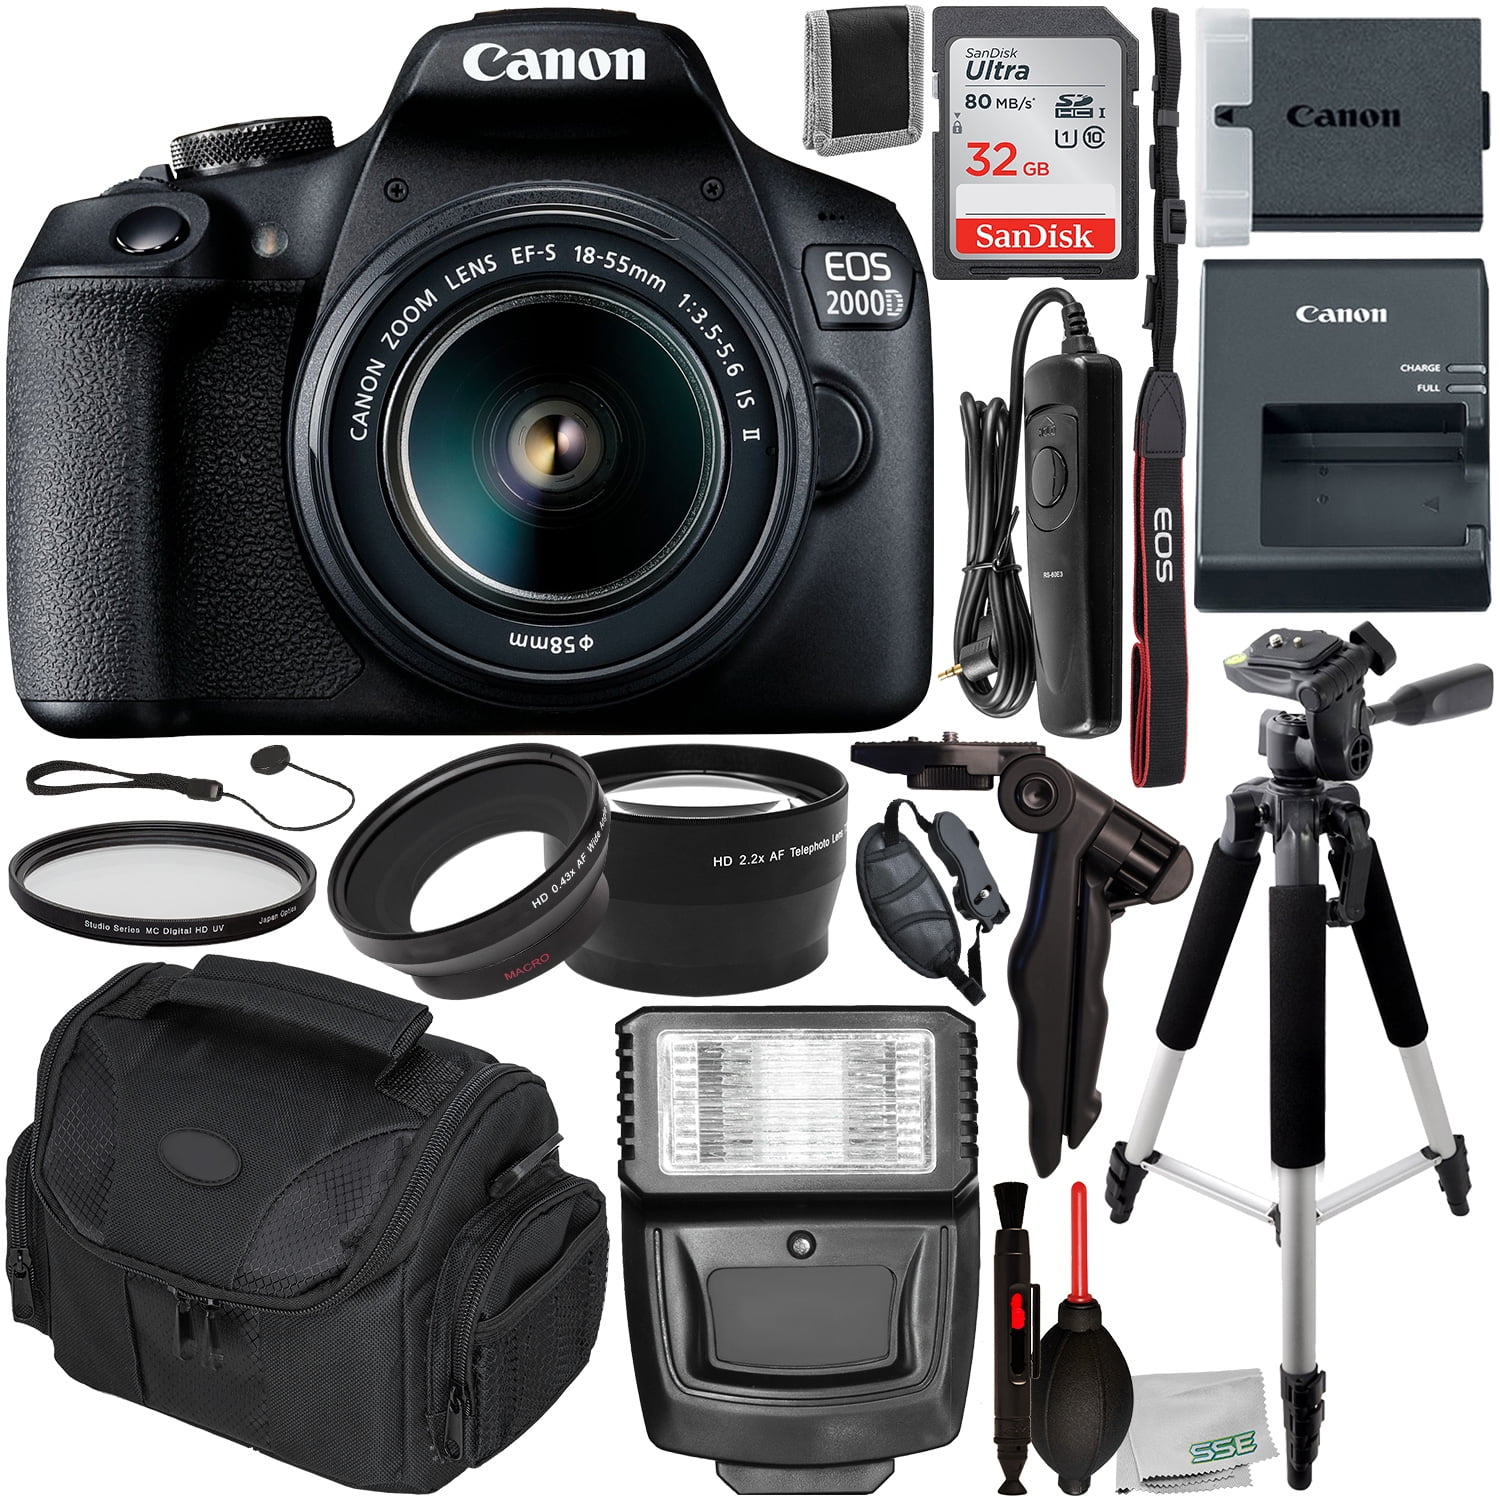 More Camera Carrying Case Includes: SanDisk Ultra 32GB SDHC Memory Card Canon EOS 2000D DSLR Camera with 18-55mm is II & 50mm f/1.8 STM Lens & Starter Accessory Bundle 2X Ultraviolet Filter 